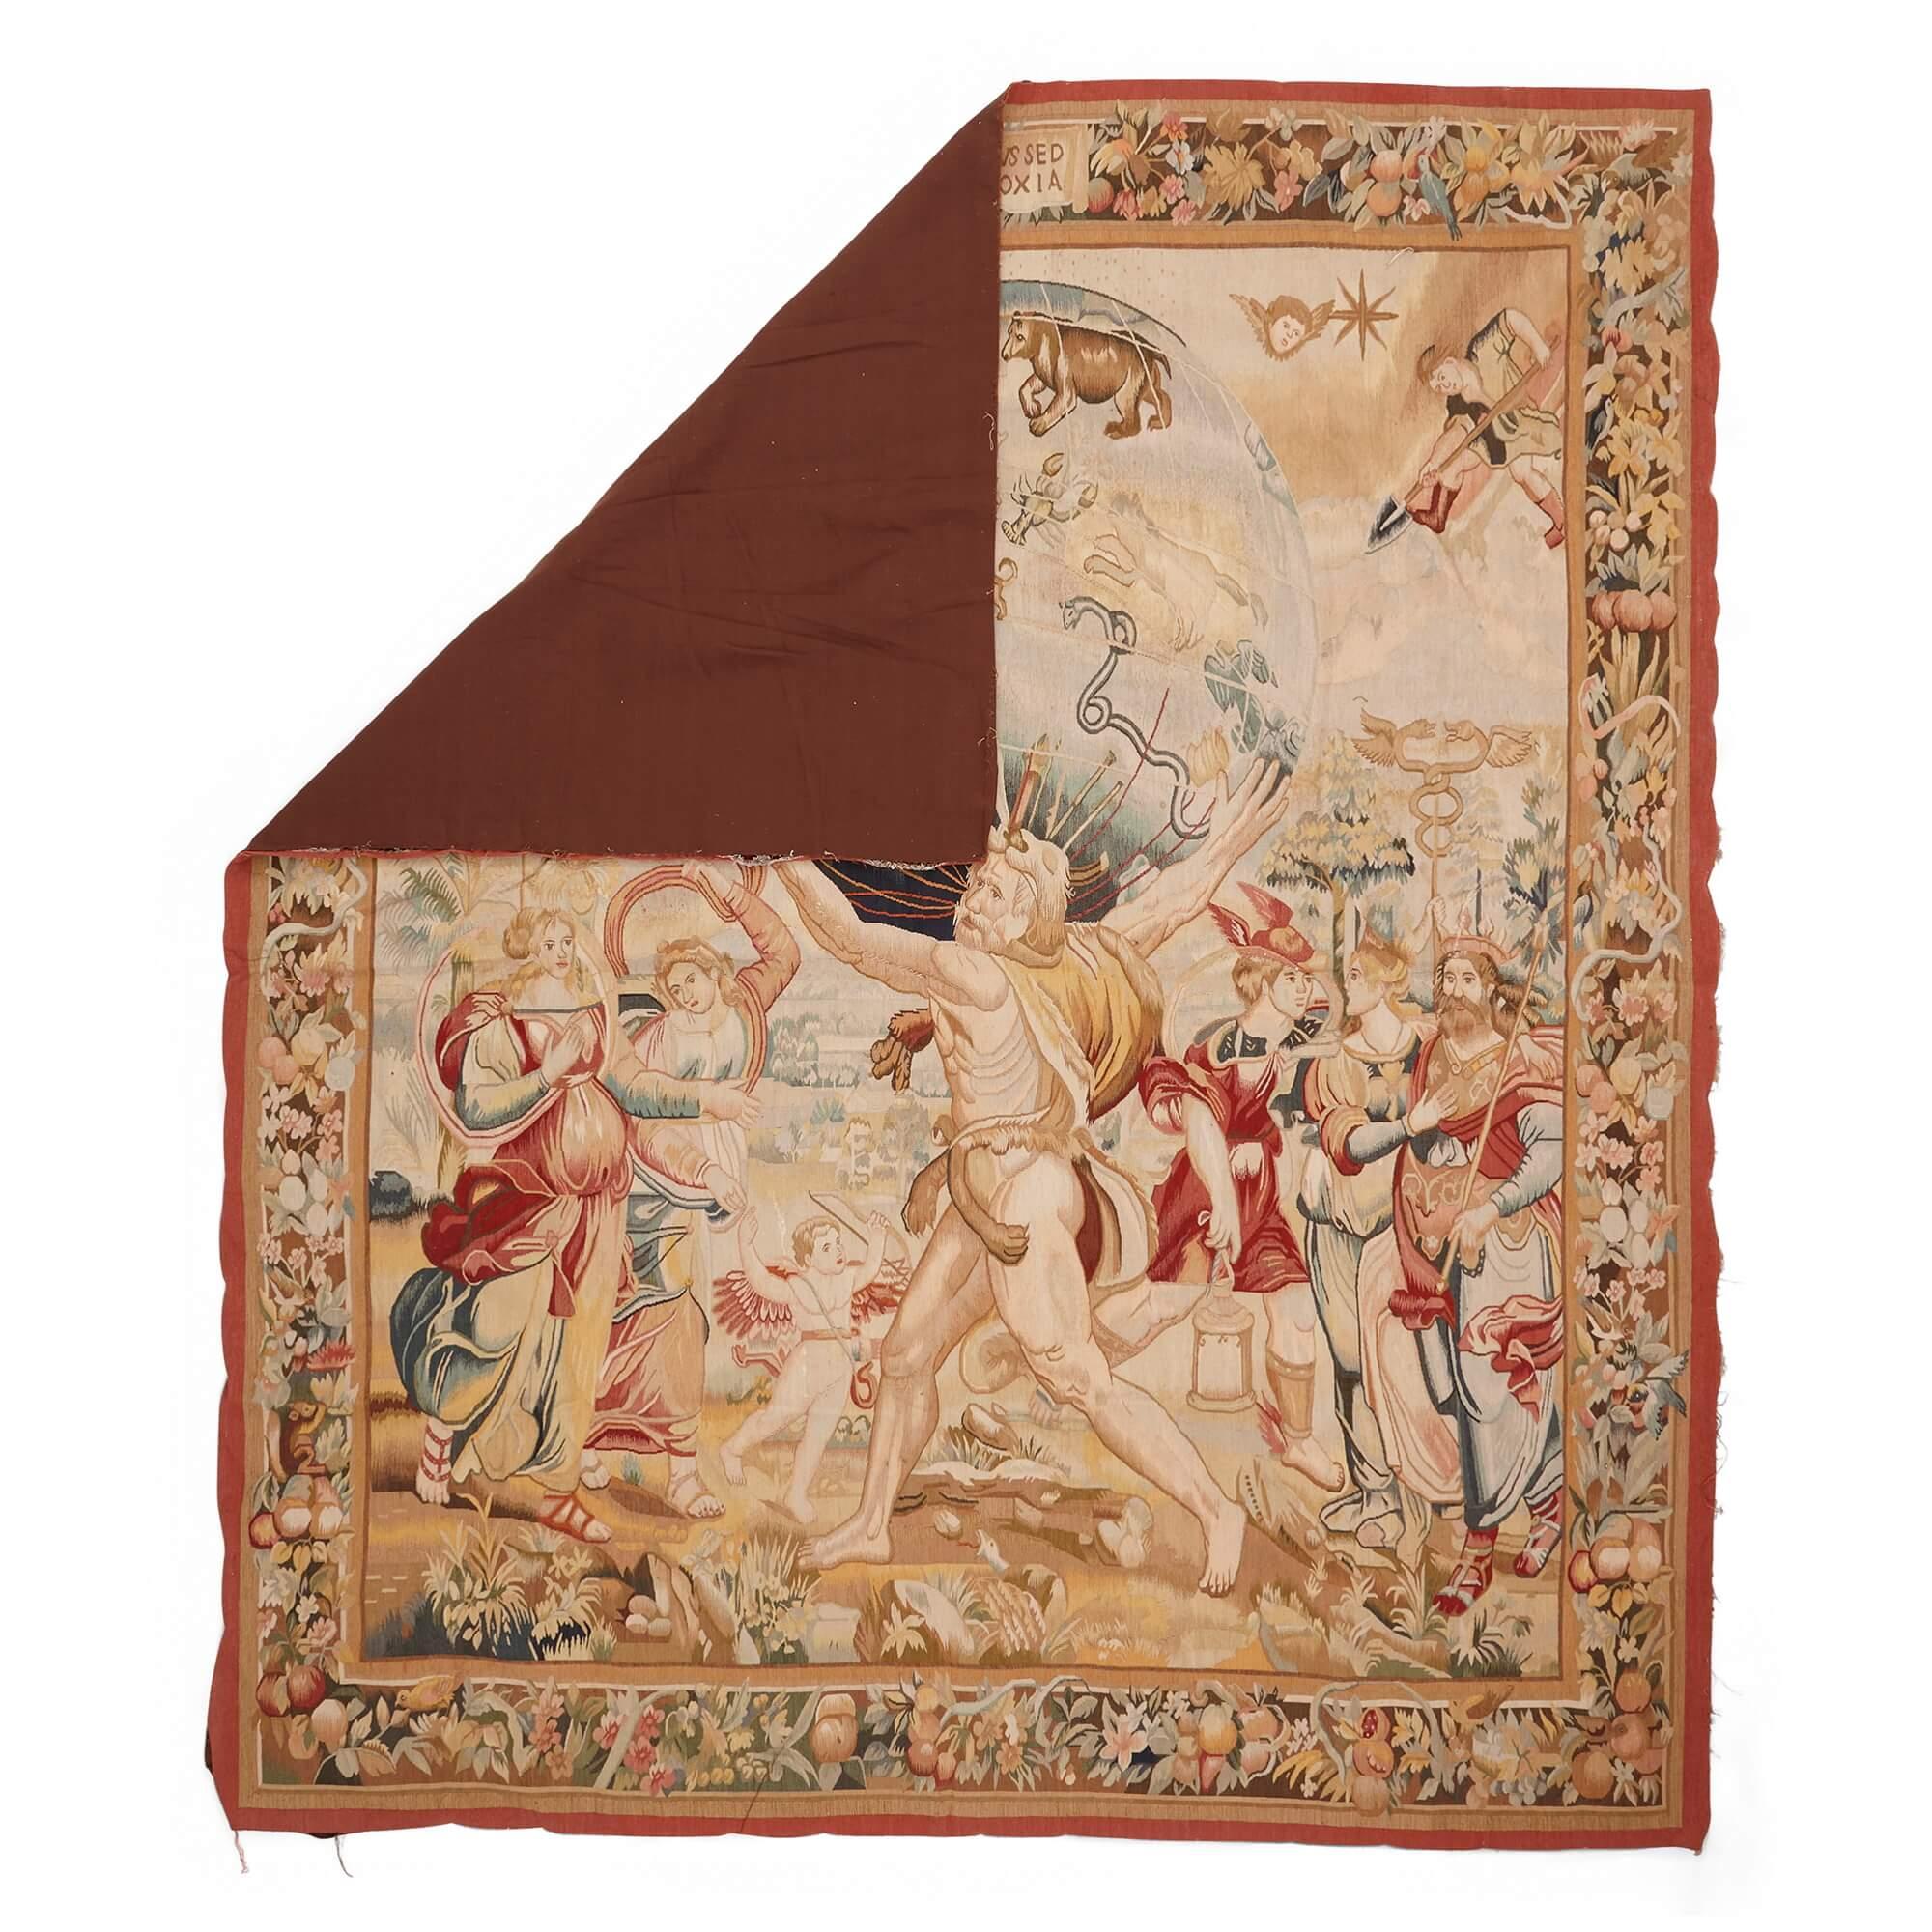 Antique tapestry in the style of van Orley depicting Hercules
Continental, 19th century 
Height 234cm, width 200cm

Inspired by a series of tapestries titled ‘The Spheres’ created by Bernard van Orley (1491-1541), the tapestry in Mayfair Gallery’s